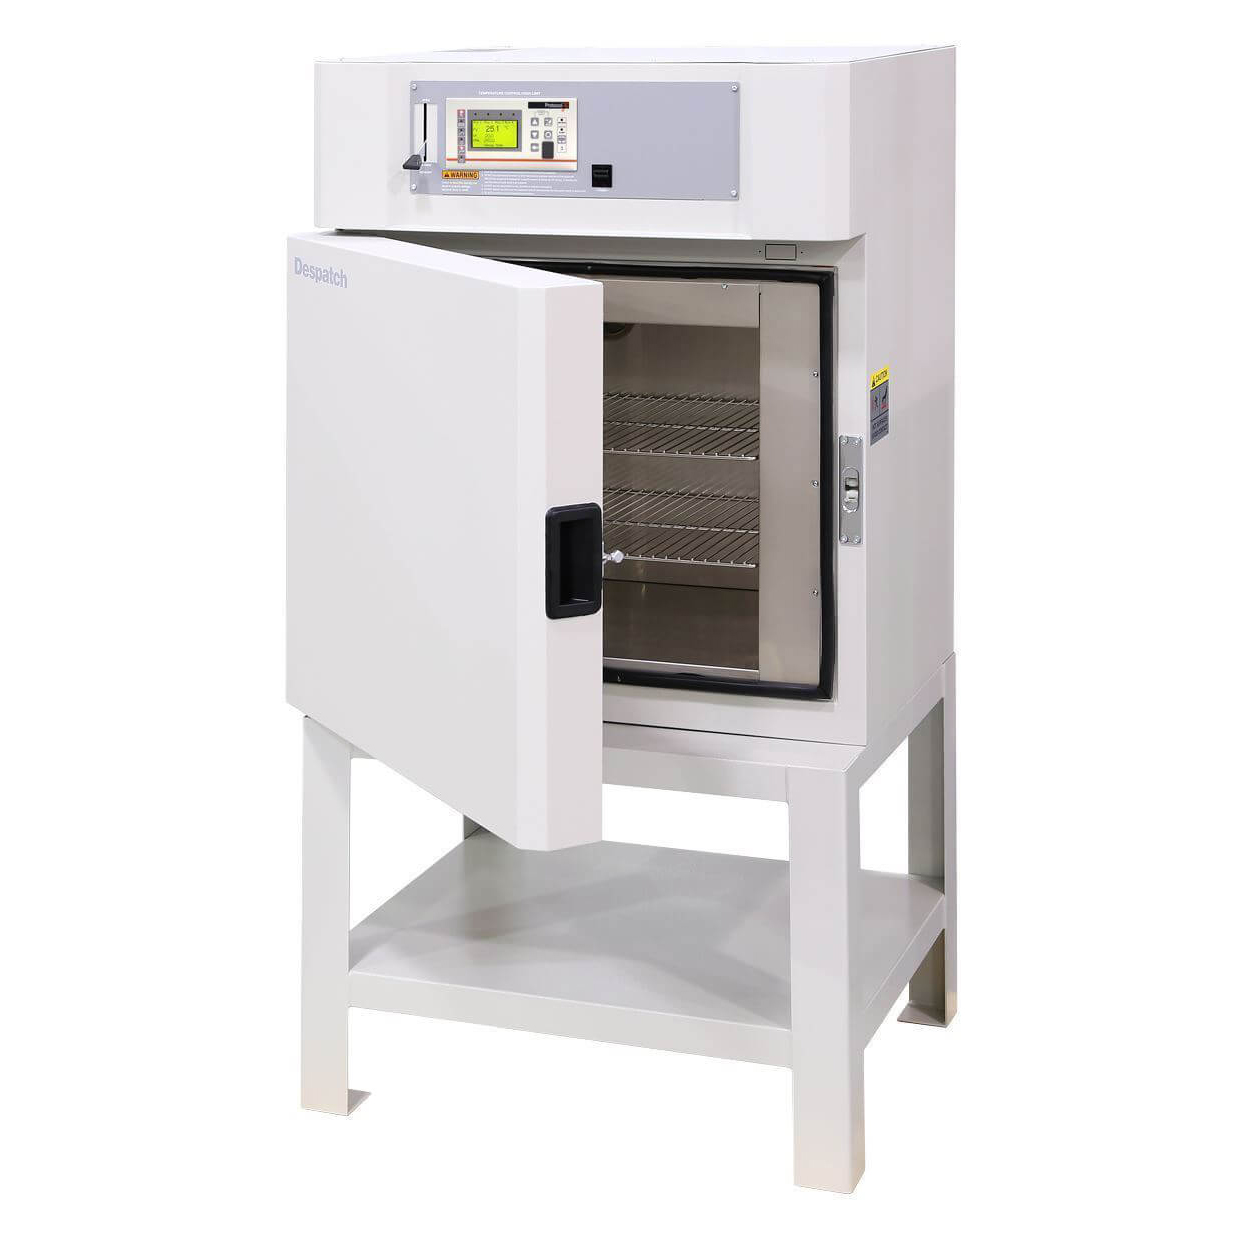 Industrial ovens and furnaces from Despatch, a trusted name in the industry